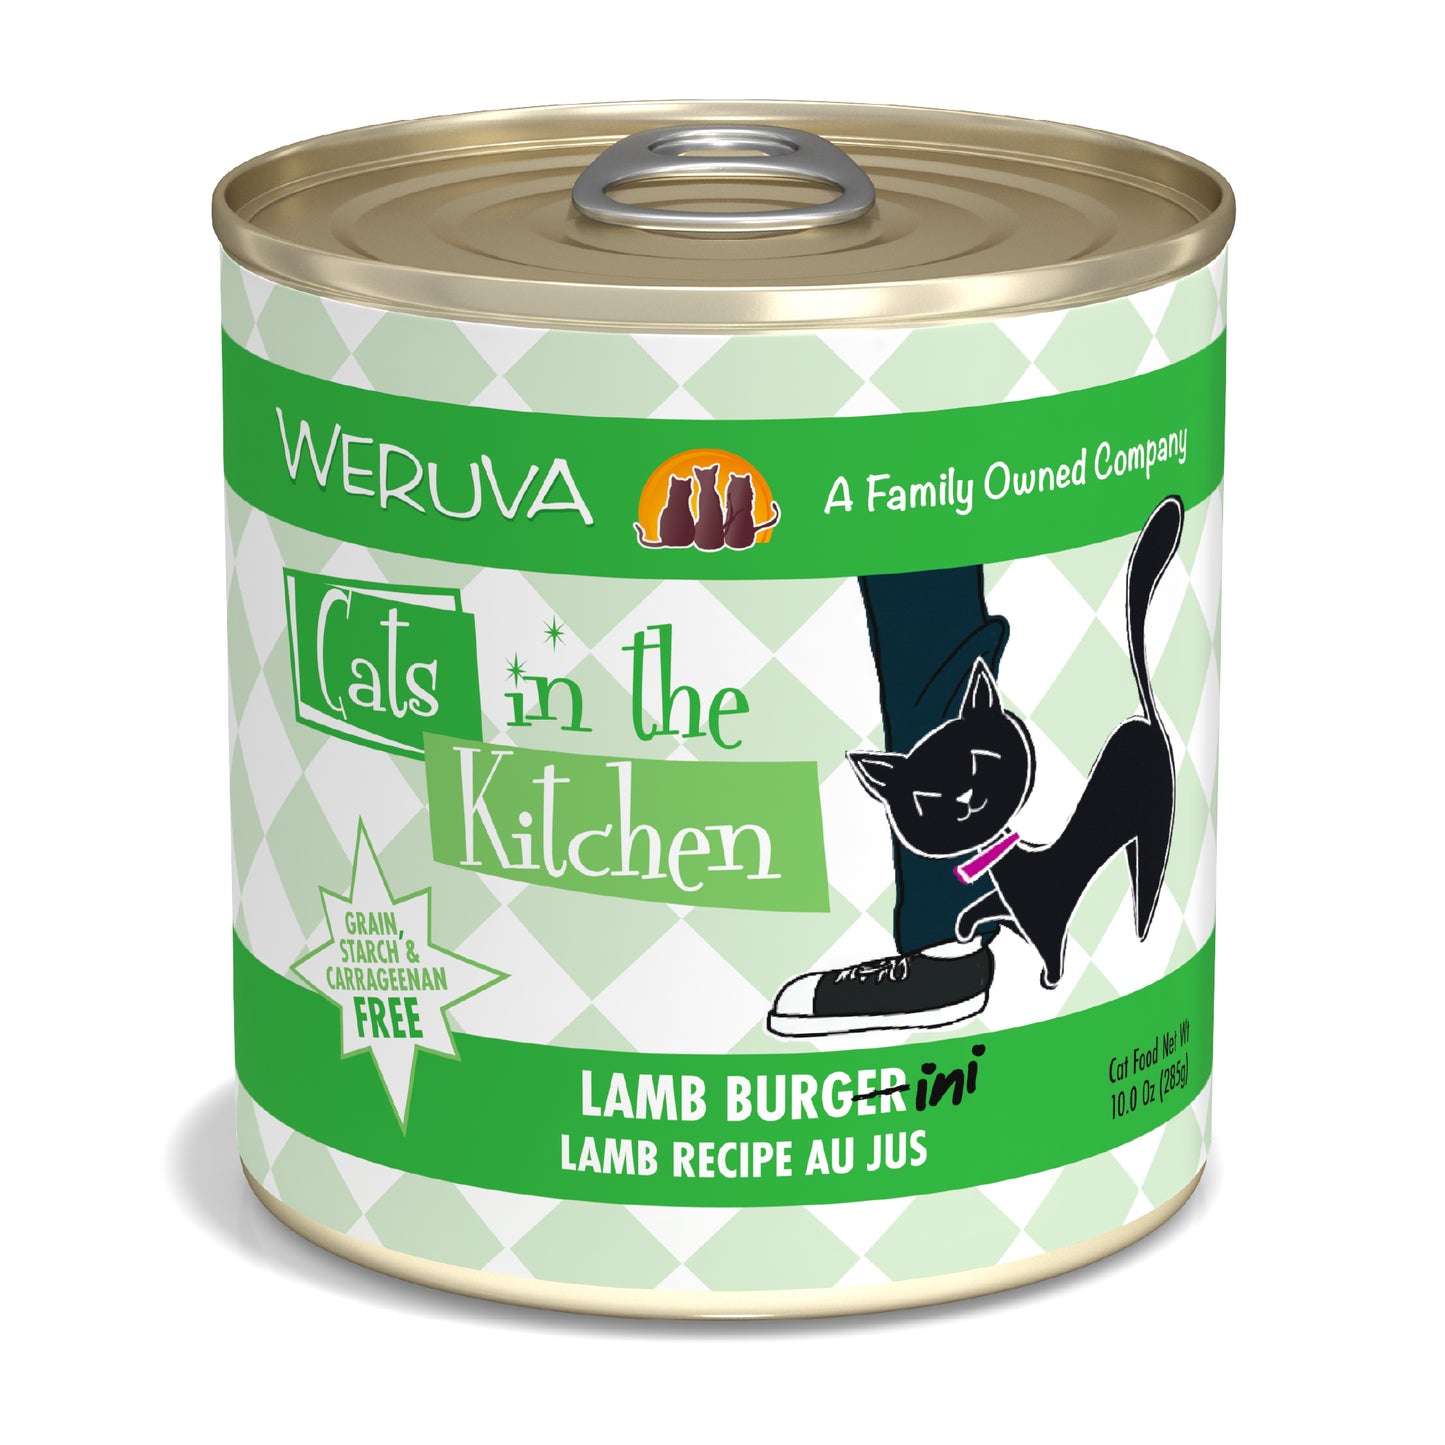 Weruva Cats in the Kitchen 10oz Canned Cat Food Lamb Burgini